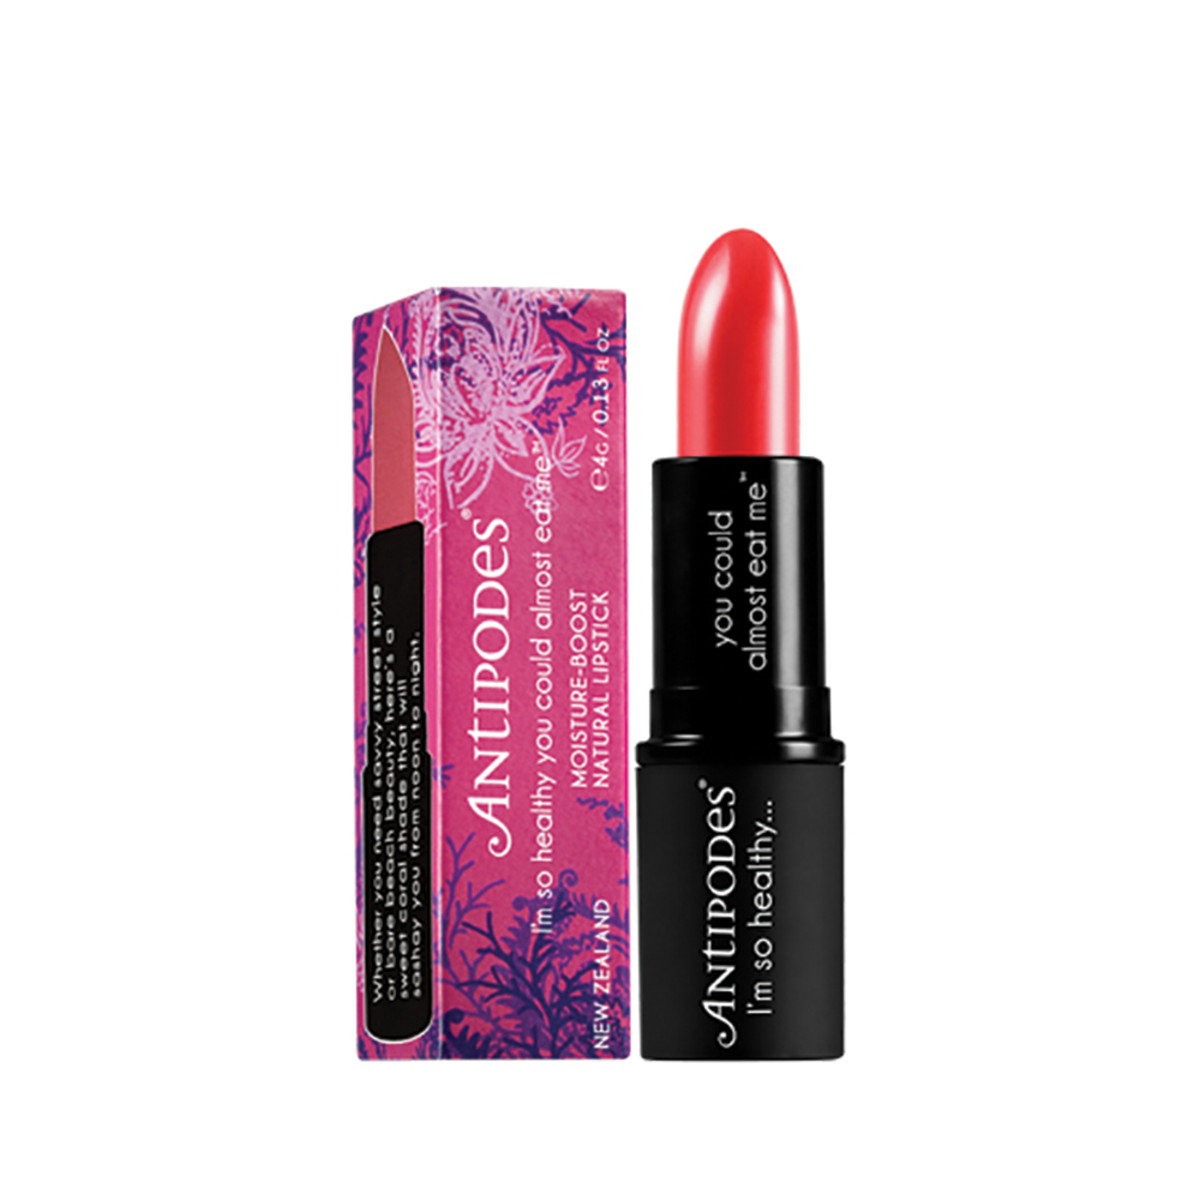 Antipodes Lipstick South Pacific Coral 4g_media-01